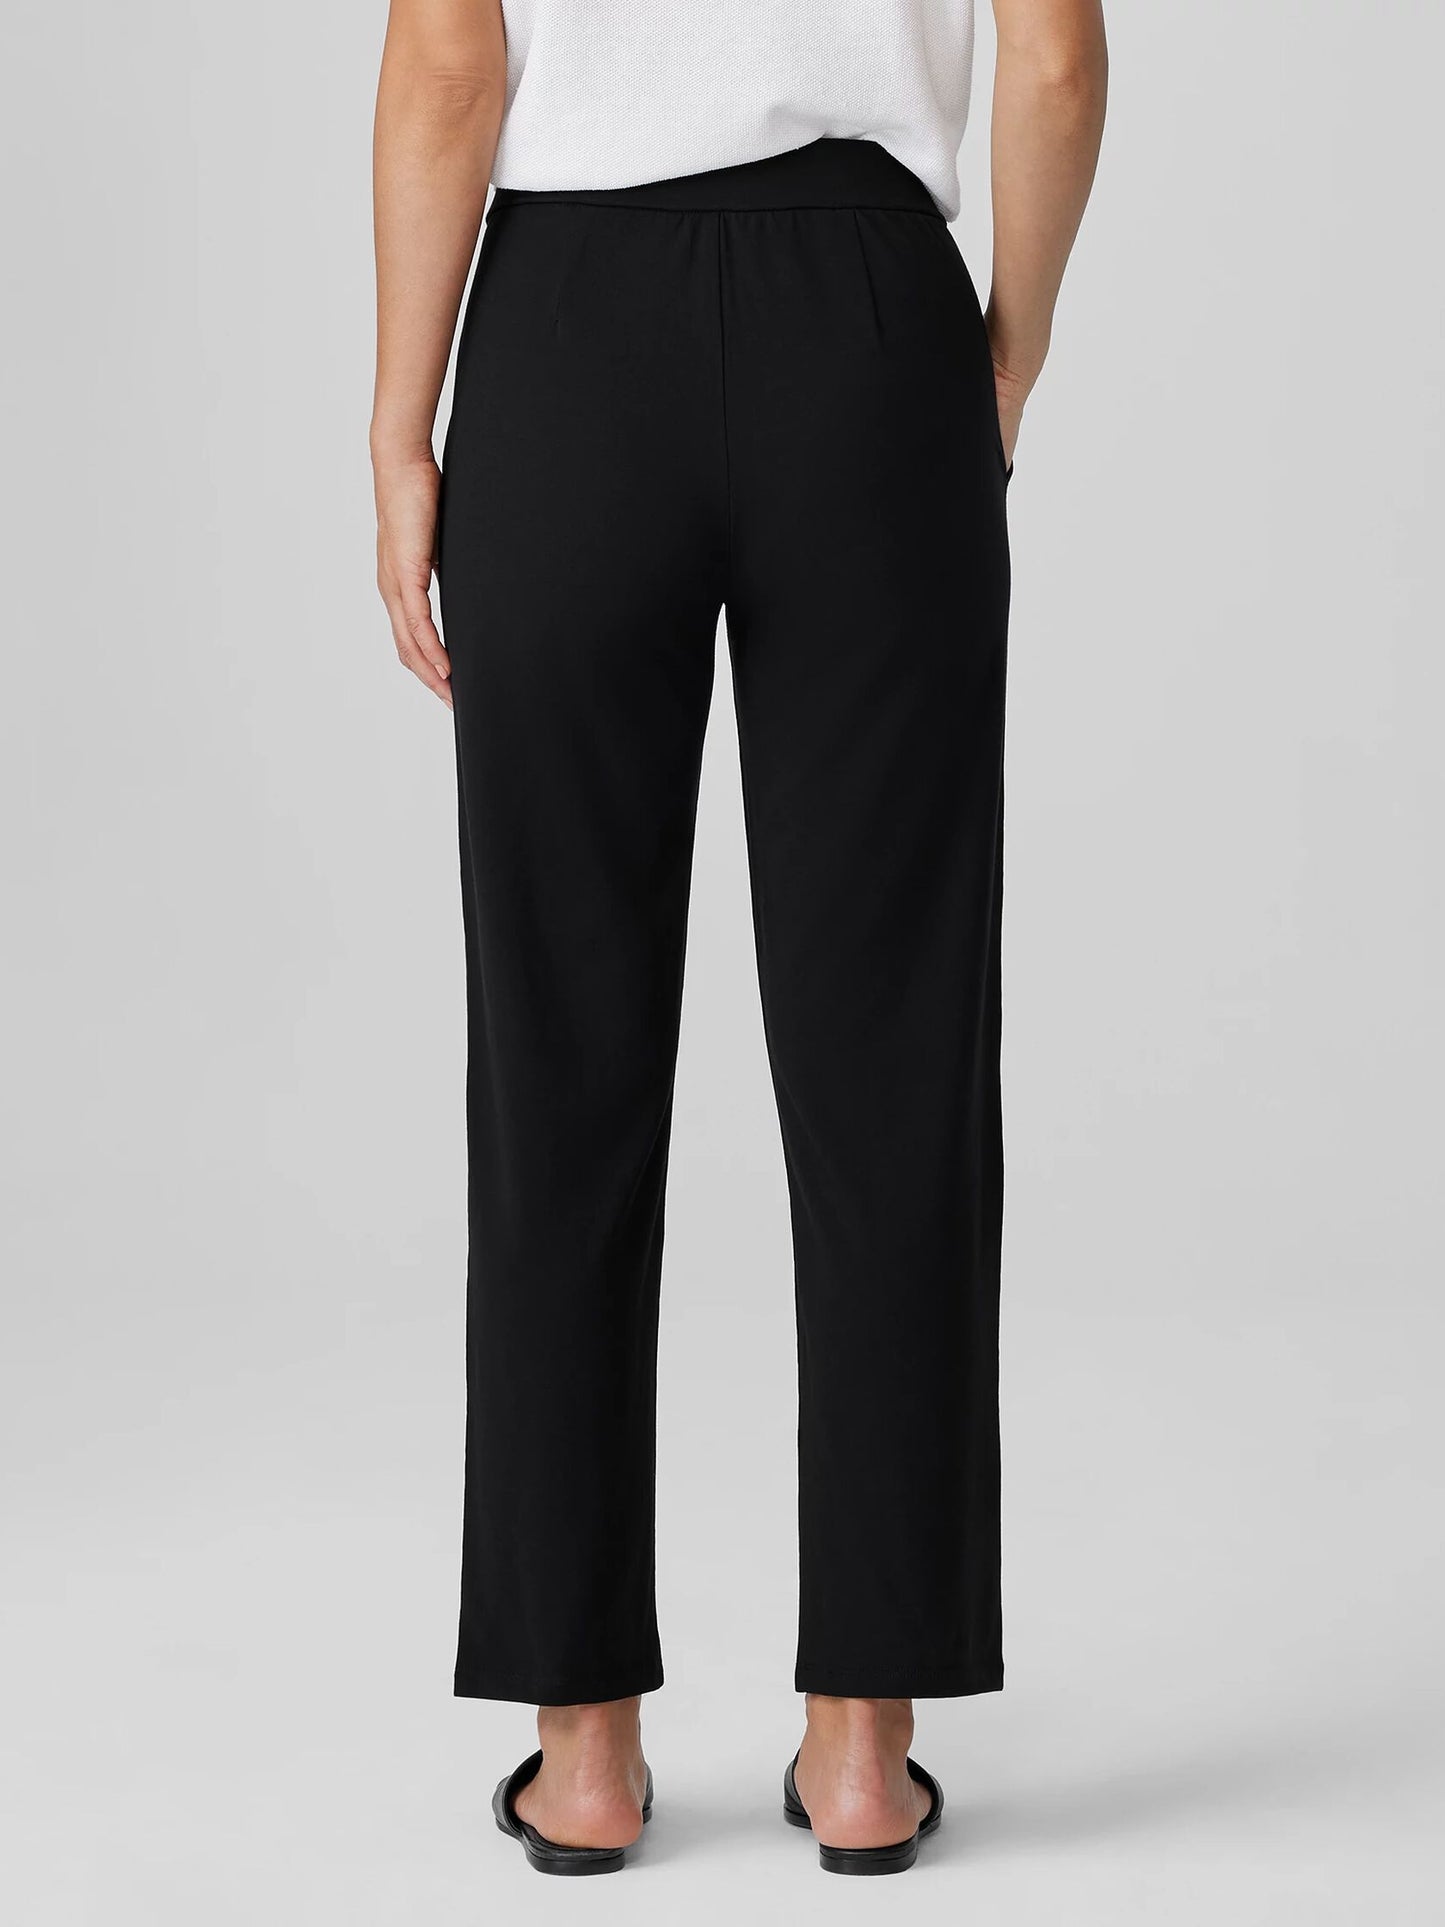 Eileen Fisher Pima Cotton Stretch Pintuck Pant